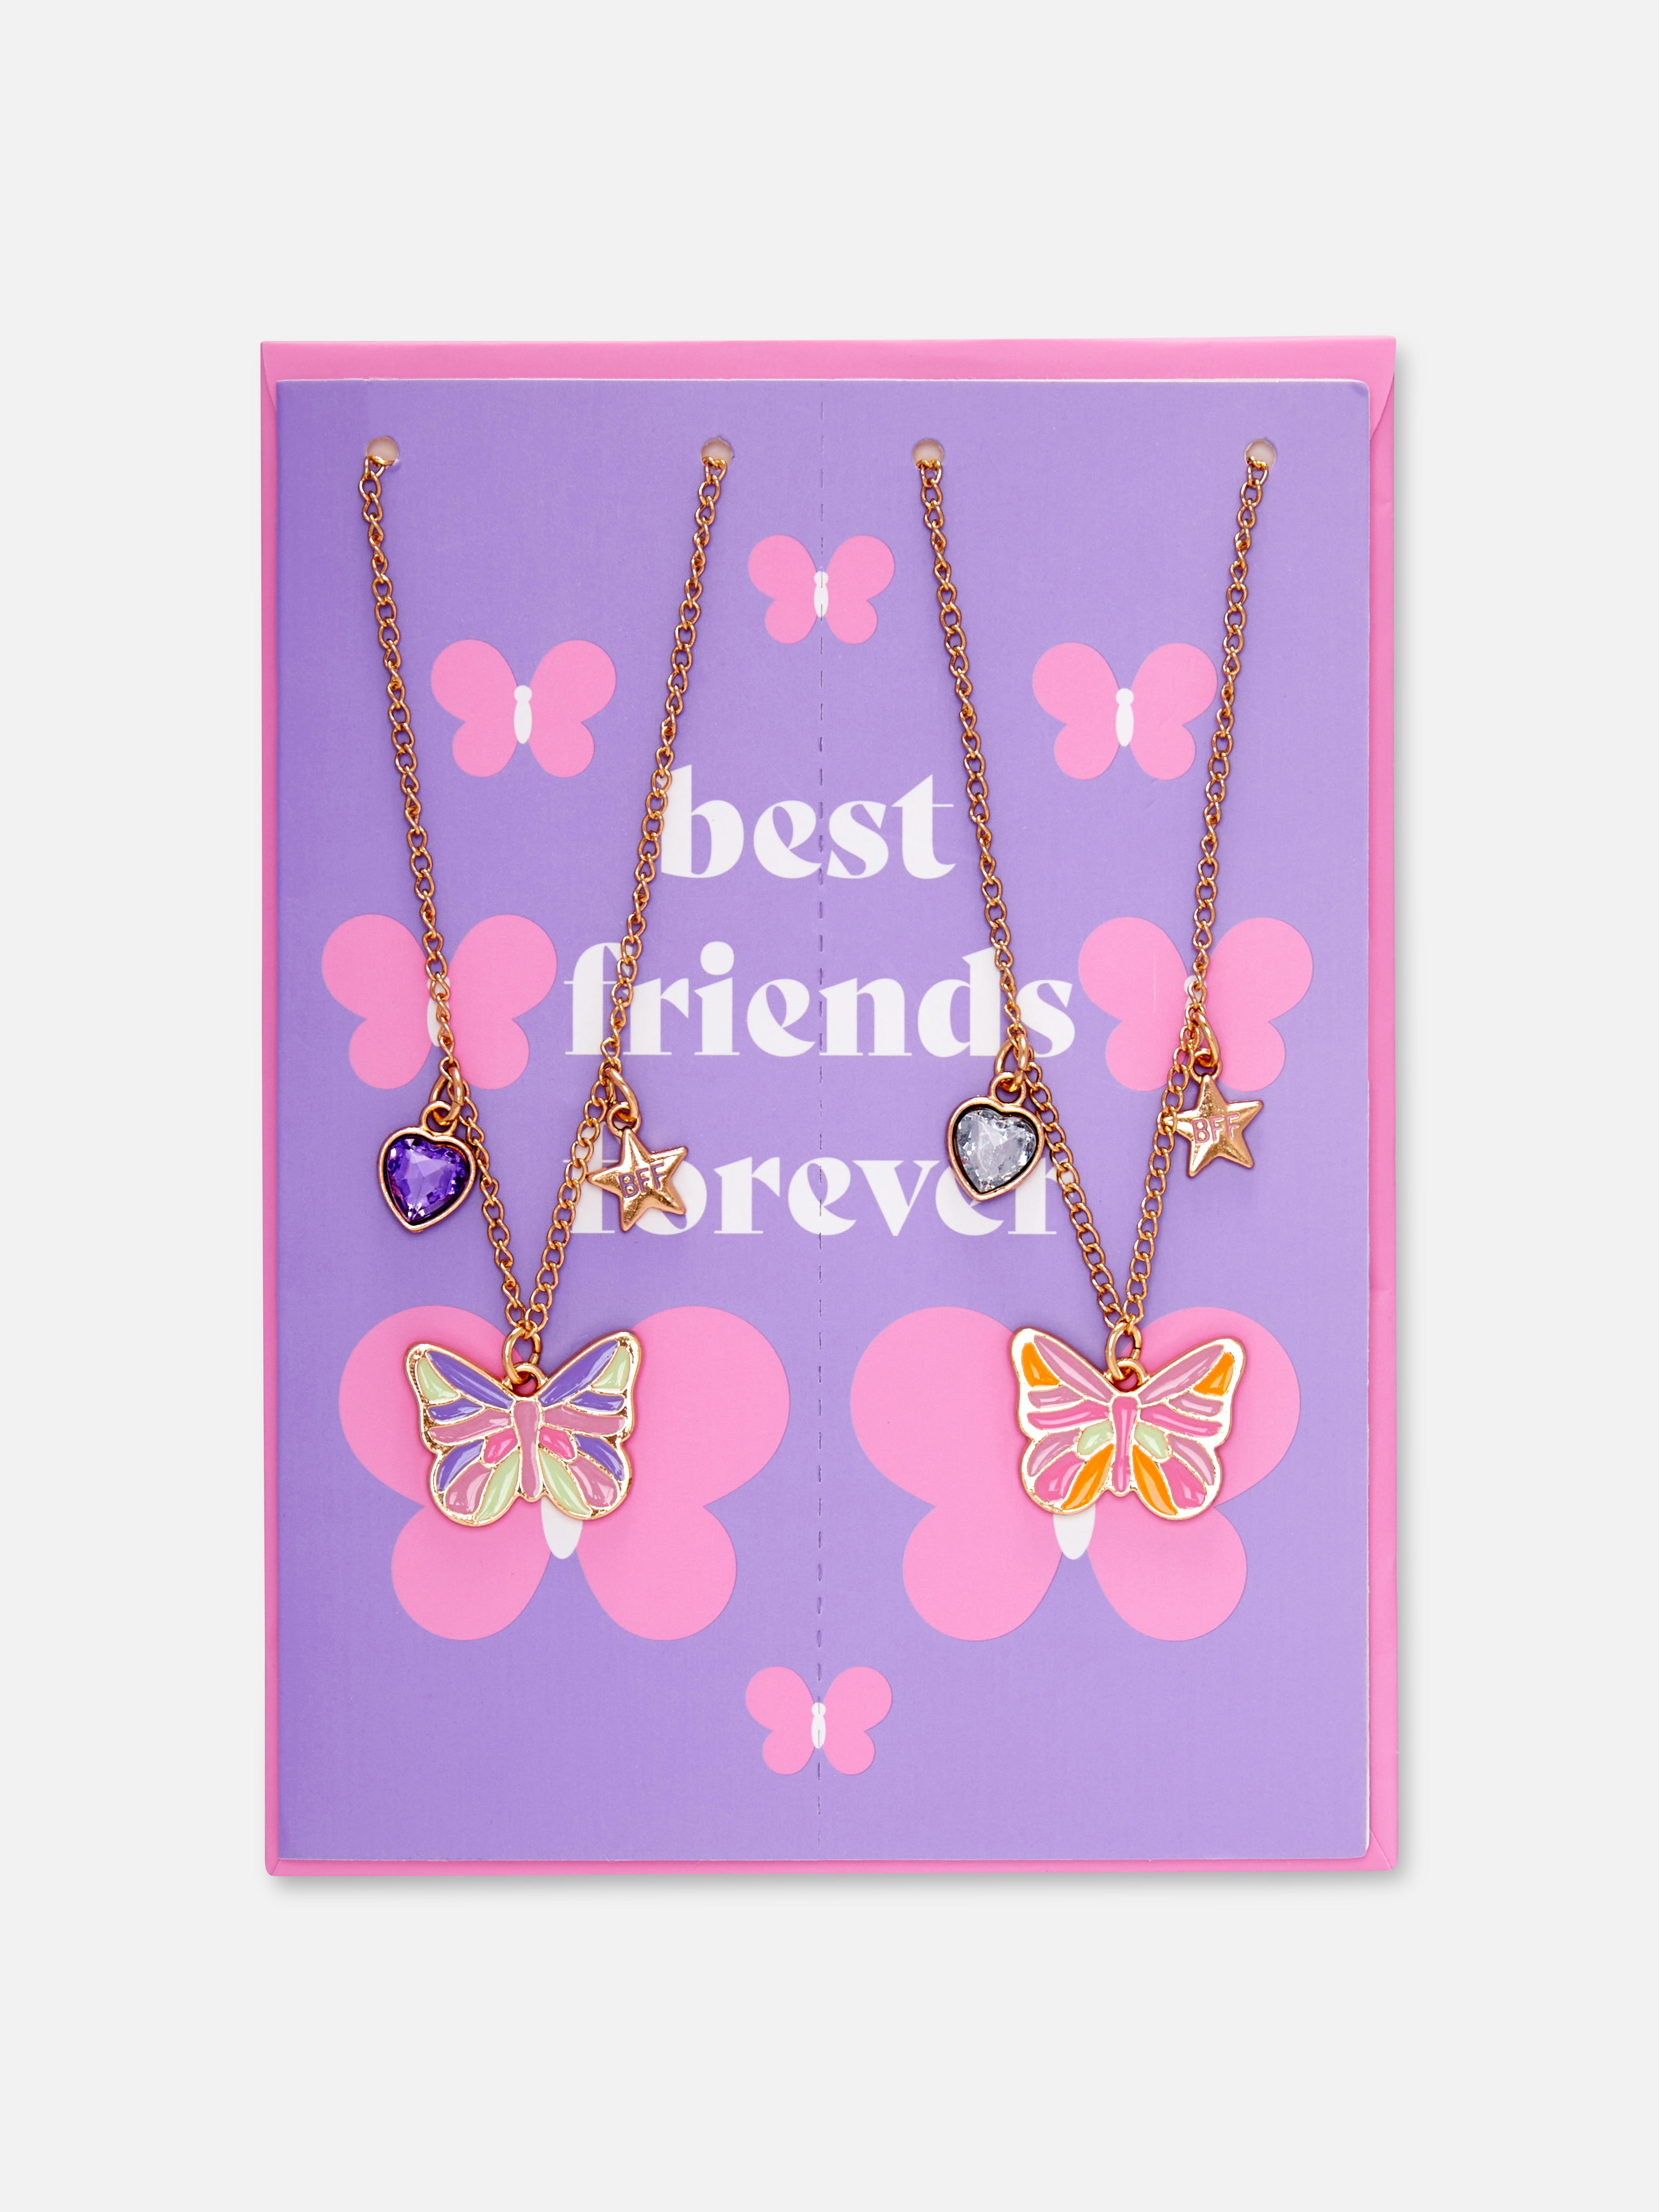 Butterfly Friendship Necklaces